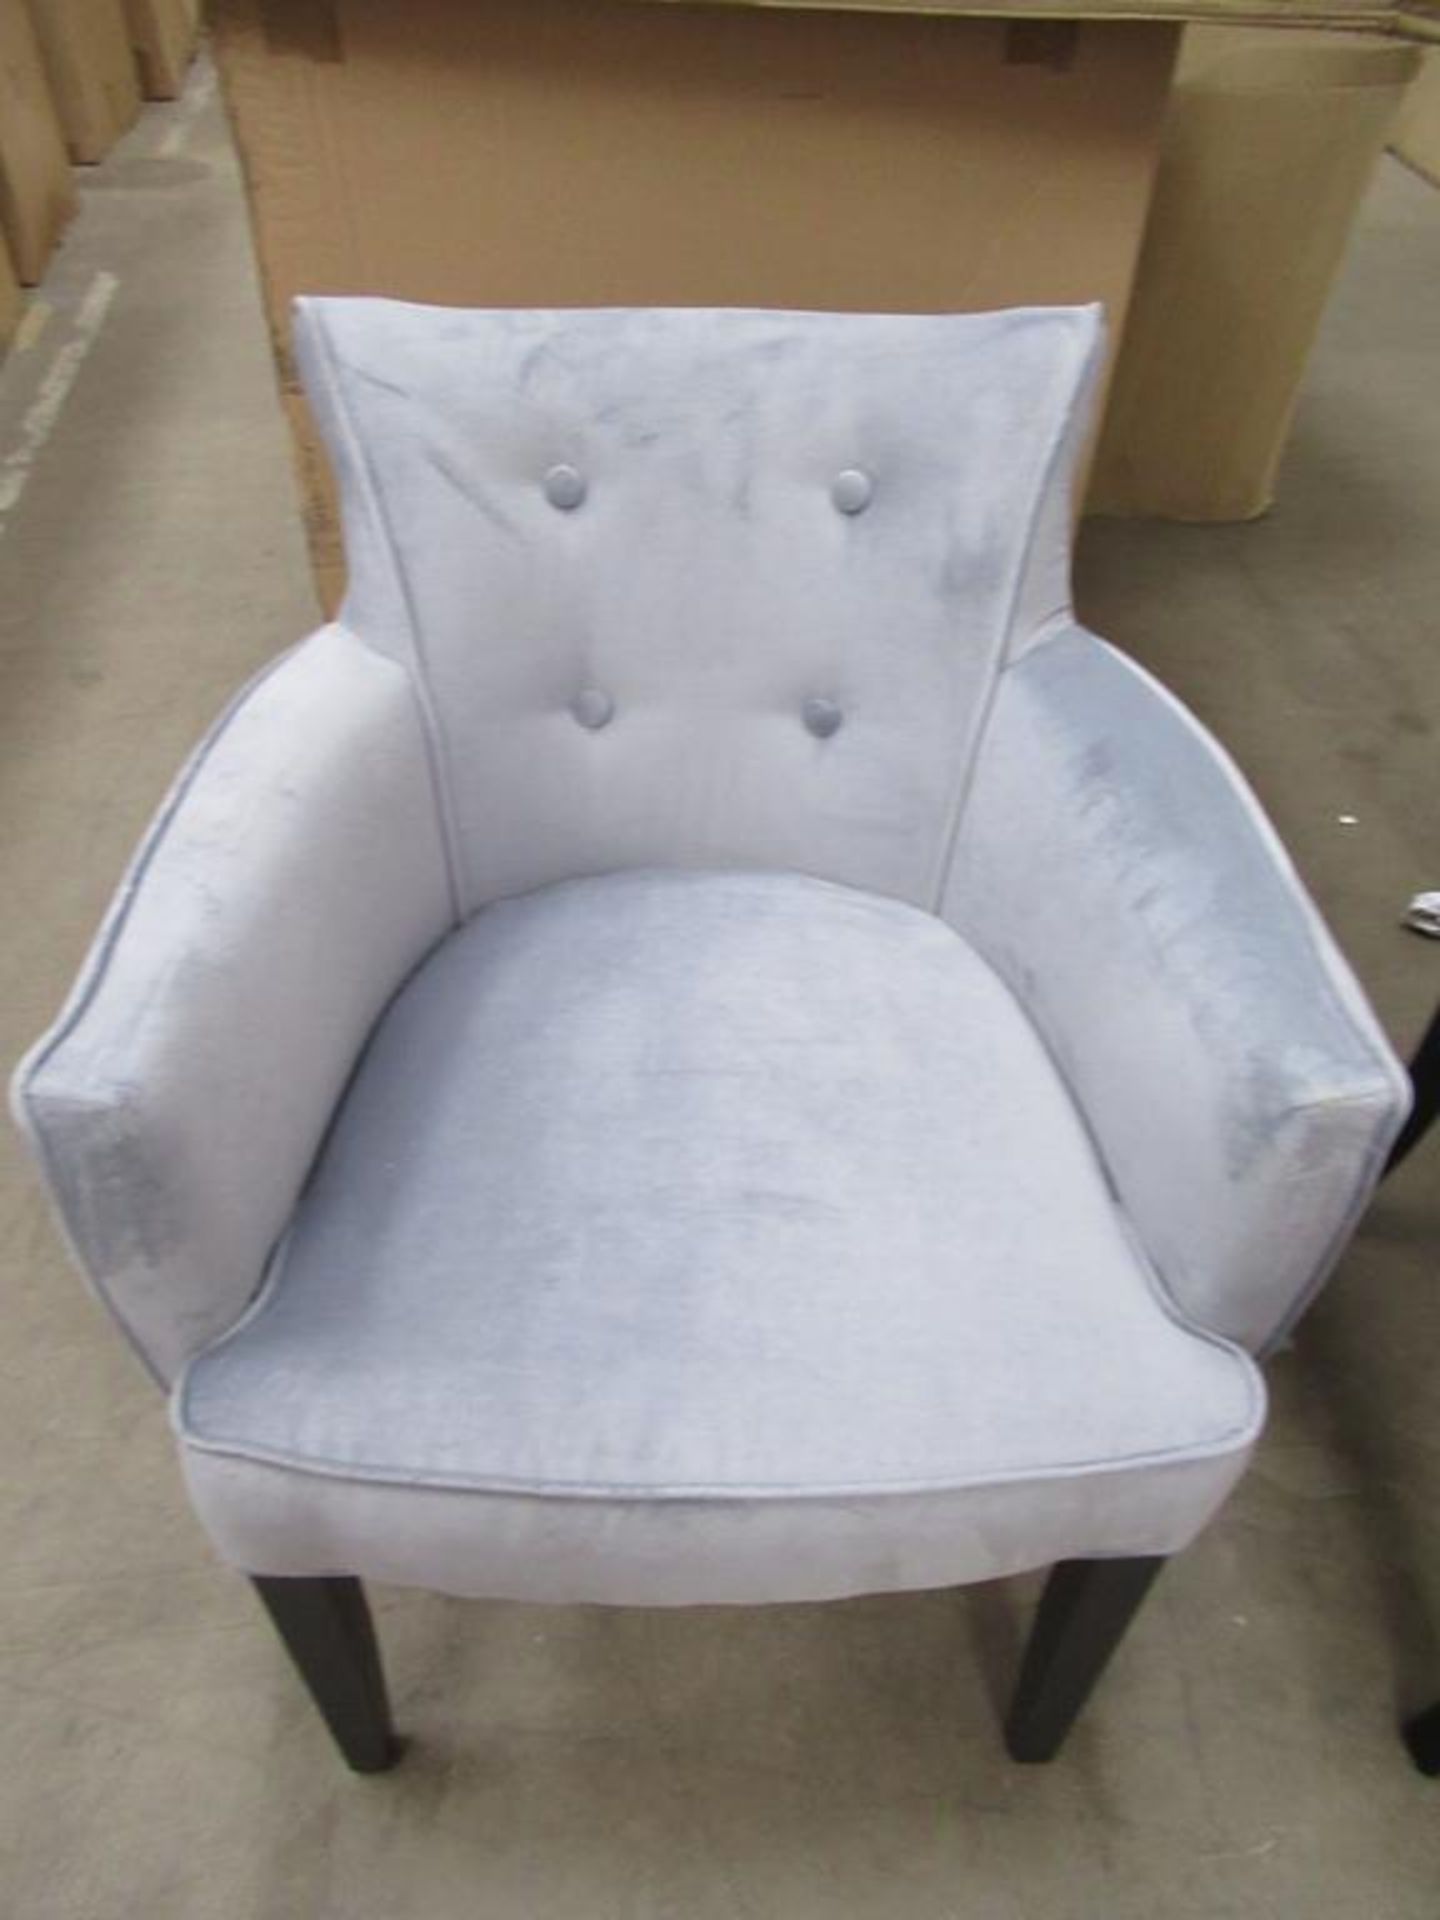 2 x Float Button Madison Tailor arm chairs - Image 2 of 3